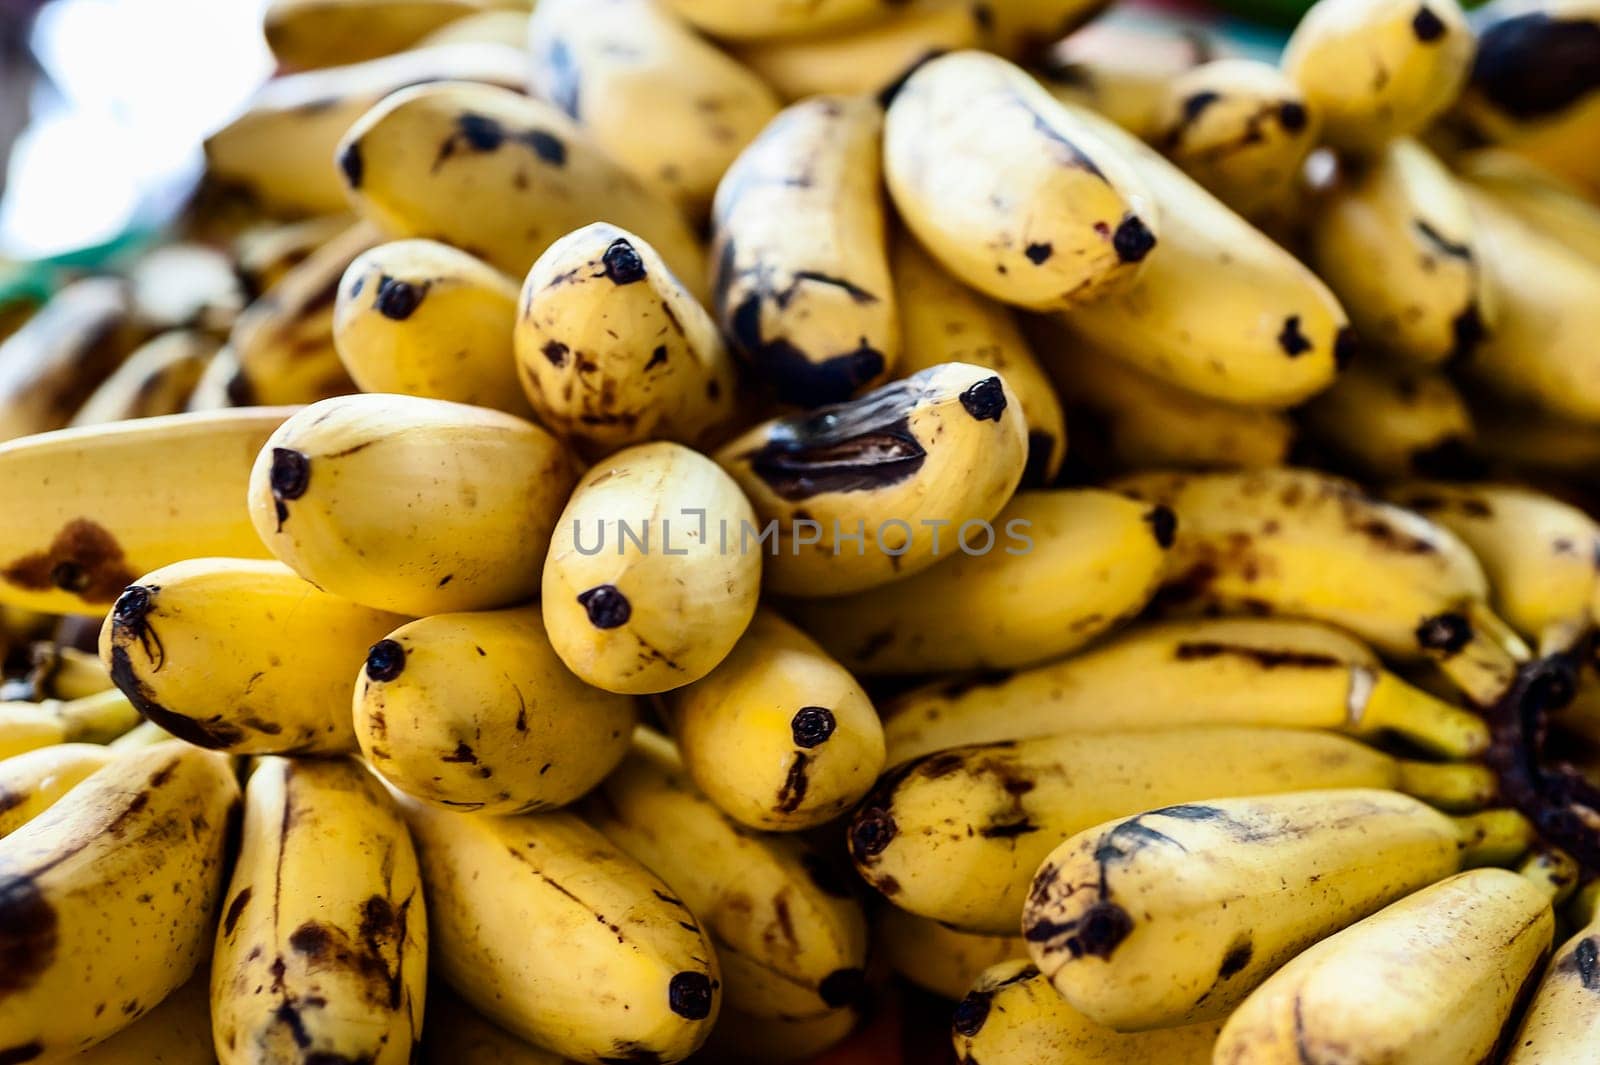 Bananas in the fruit and vegetable market of Fort de France in Martinique